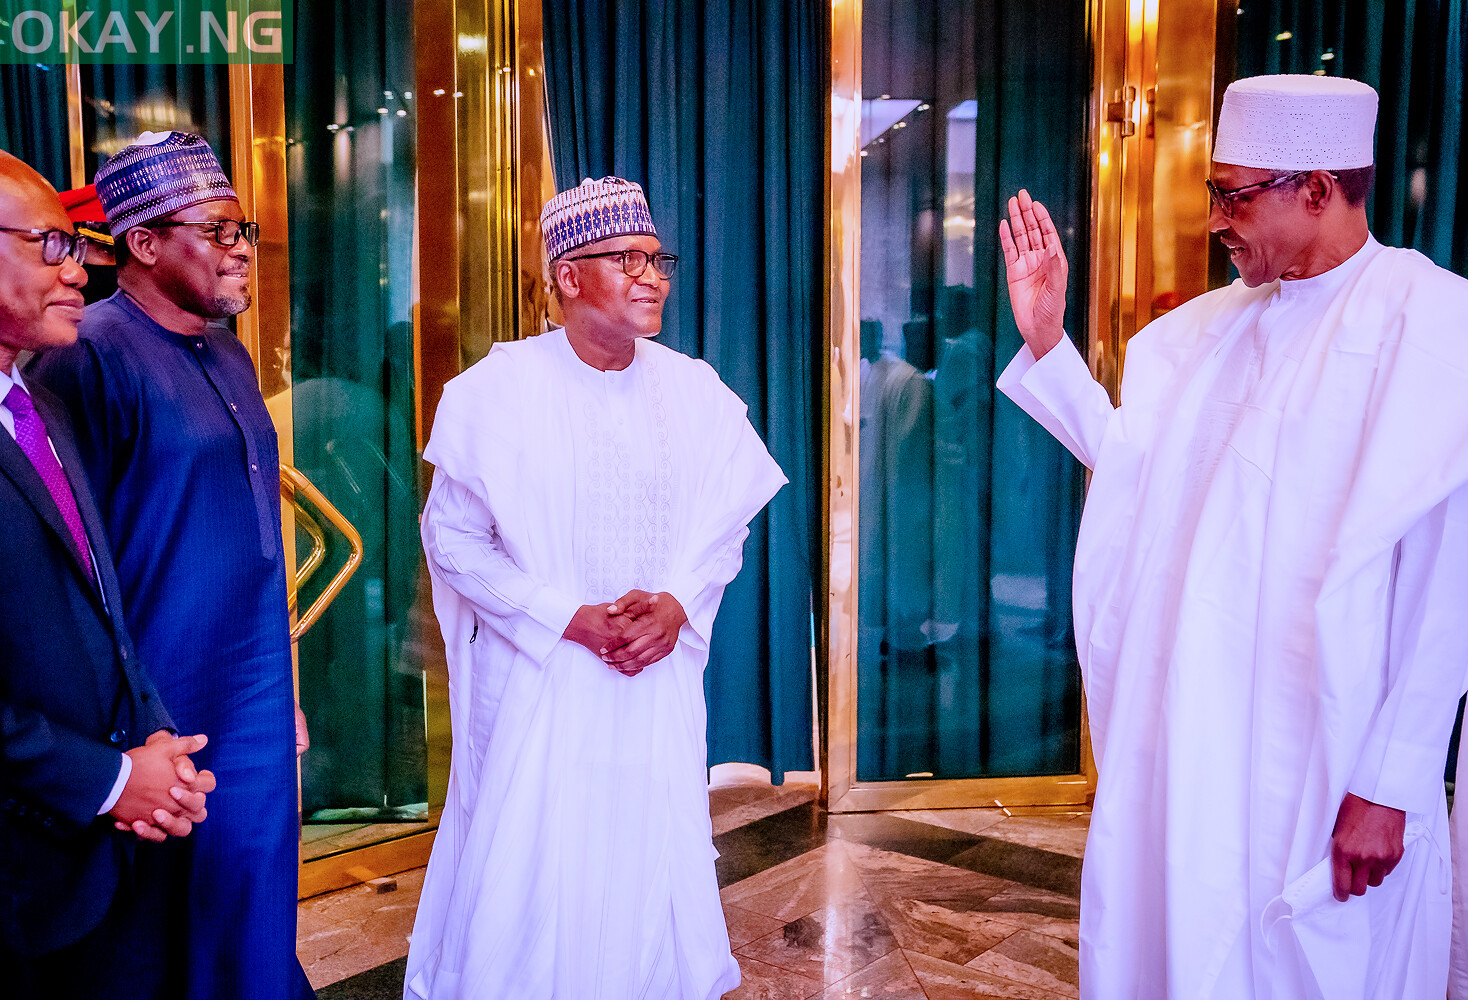 President Muhammadu Buhari welcoming the Management and Board of Dangote Industries Limited (DIL), to the Presidential Villa, in Abuja on Friday